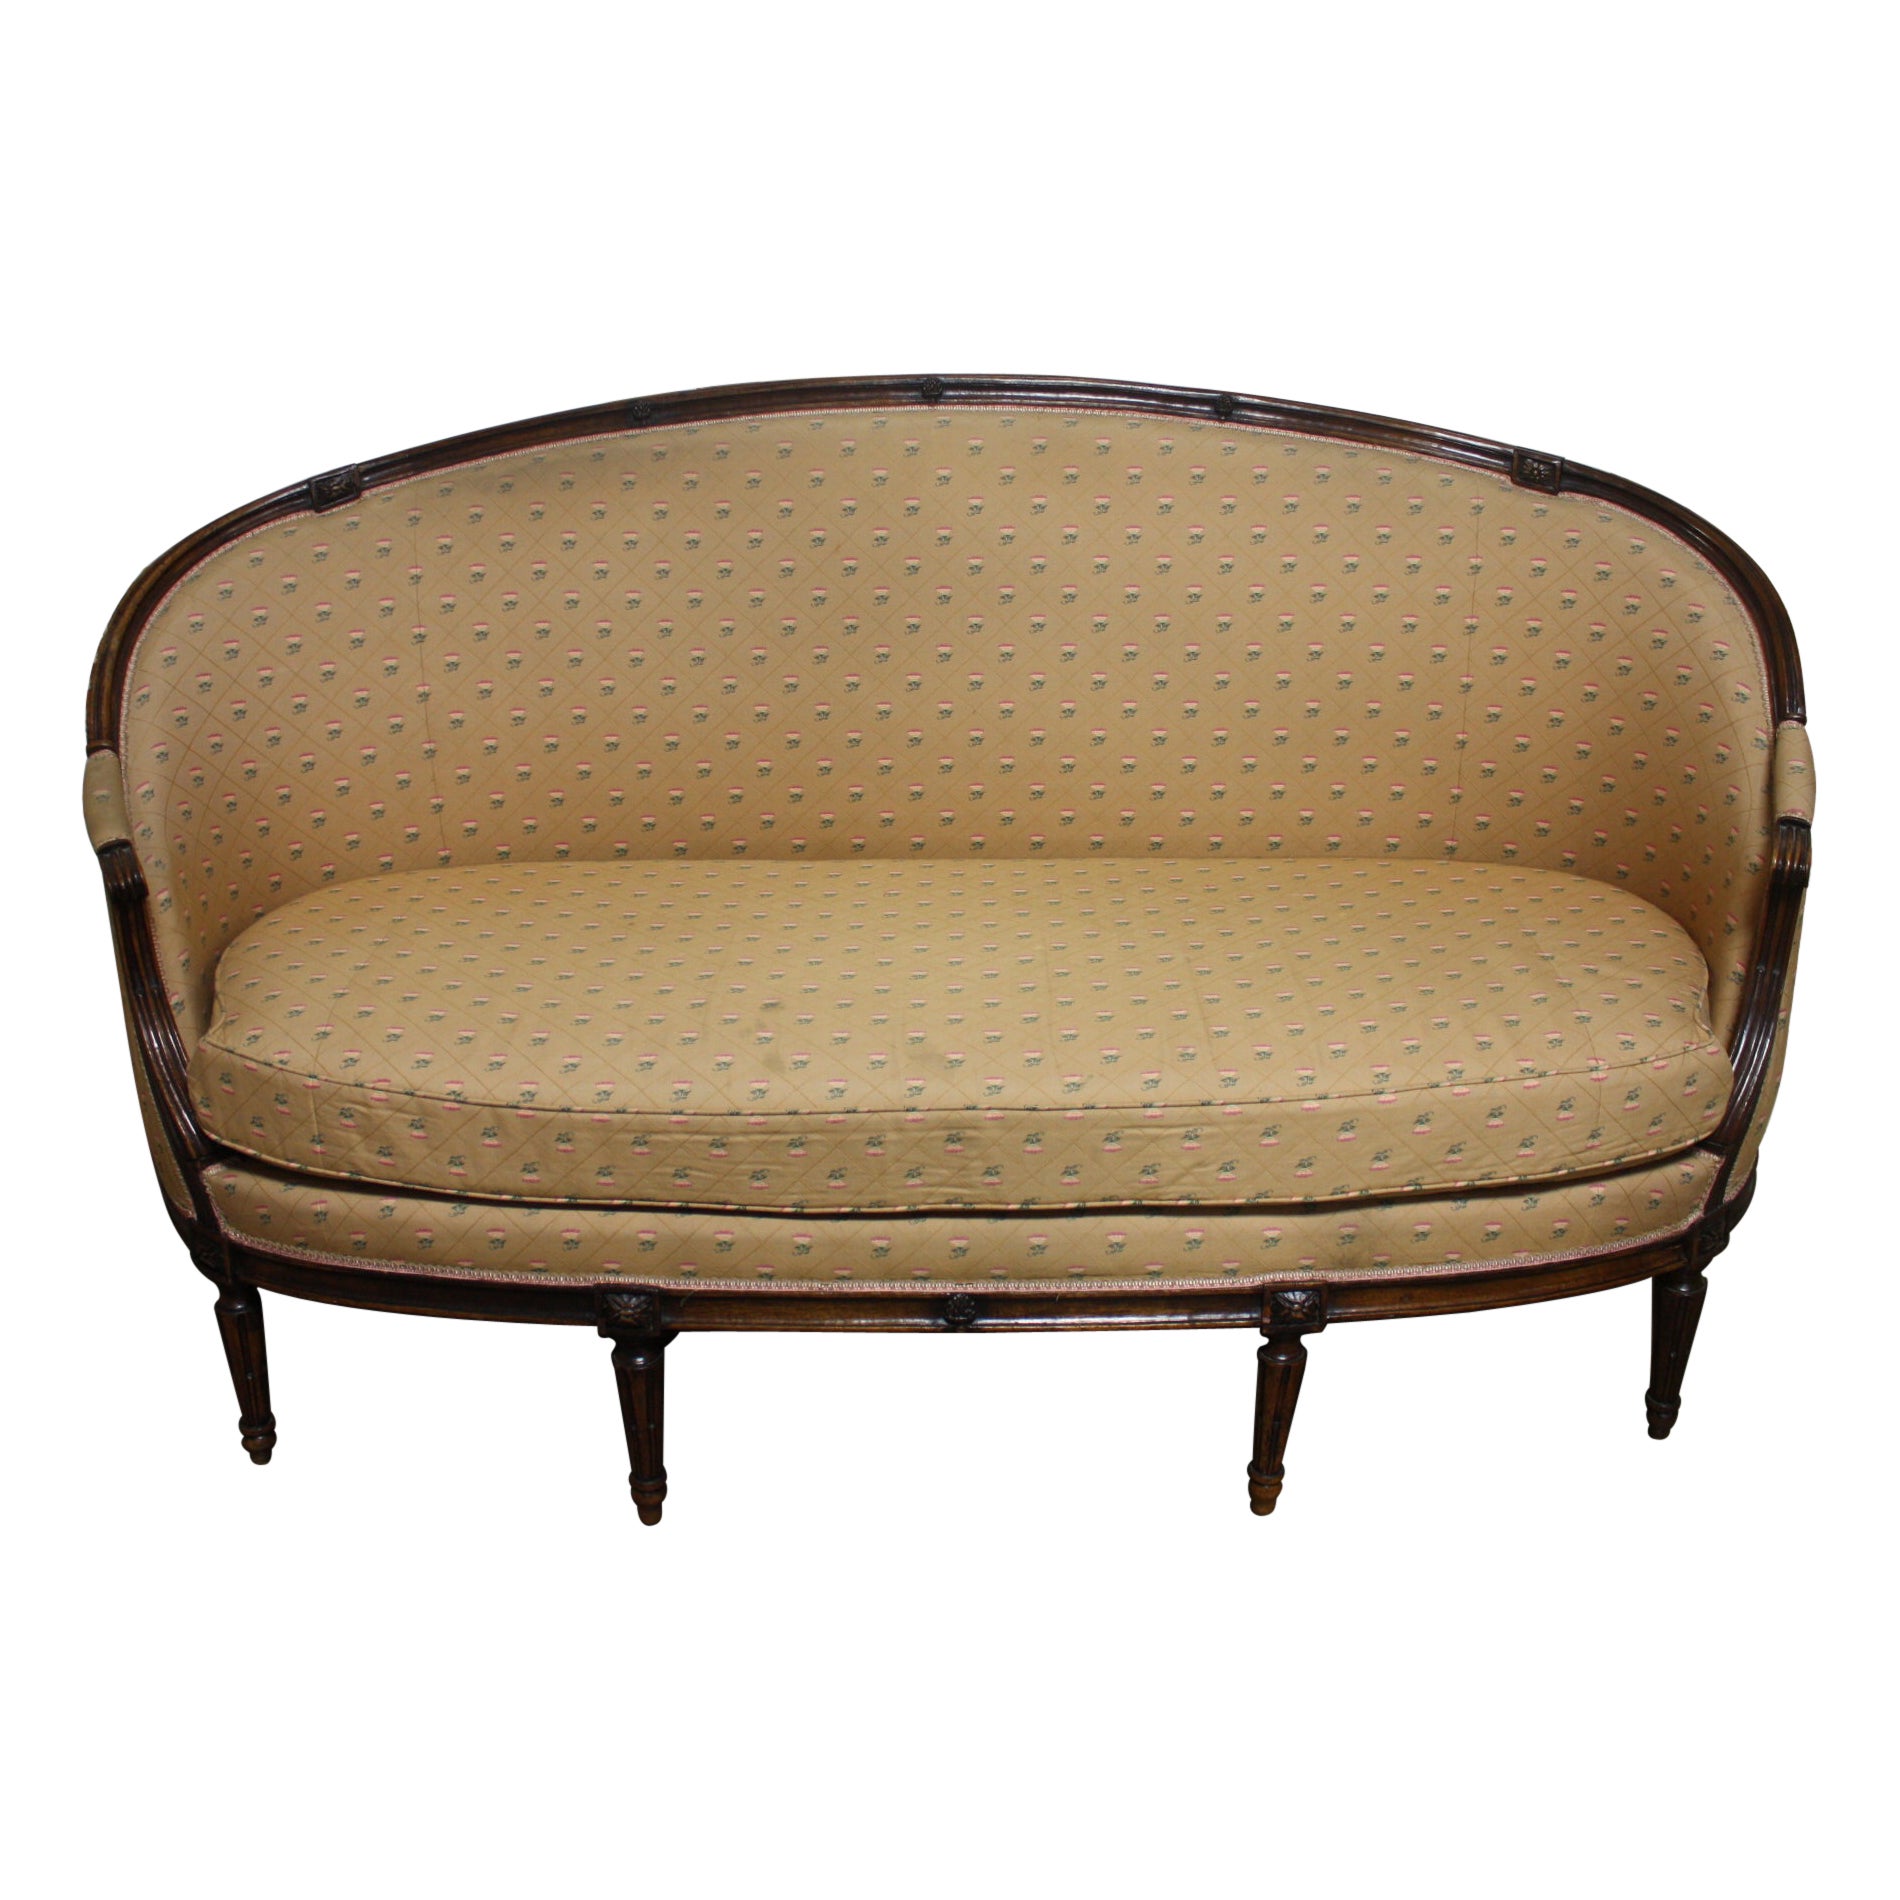 French Mid-19th Century Louis XVI Canape For Sale